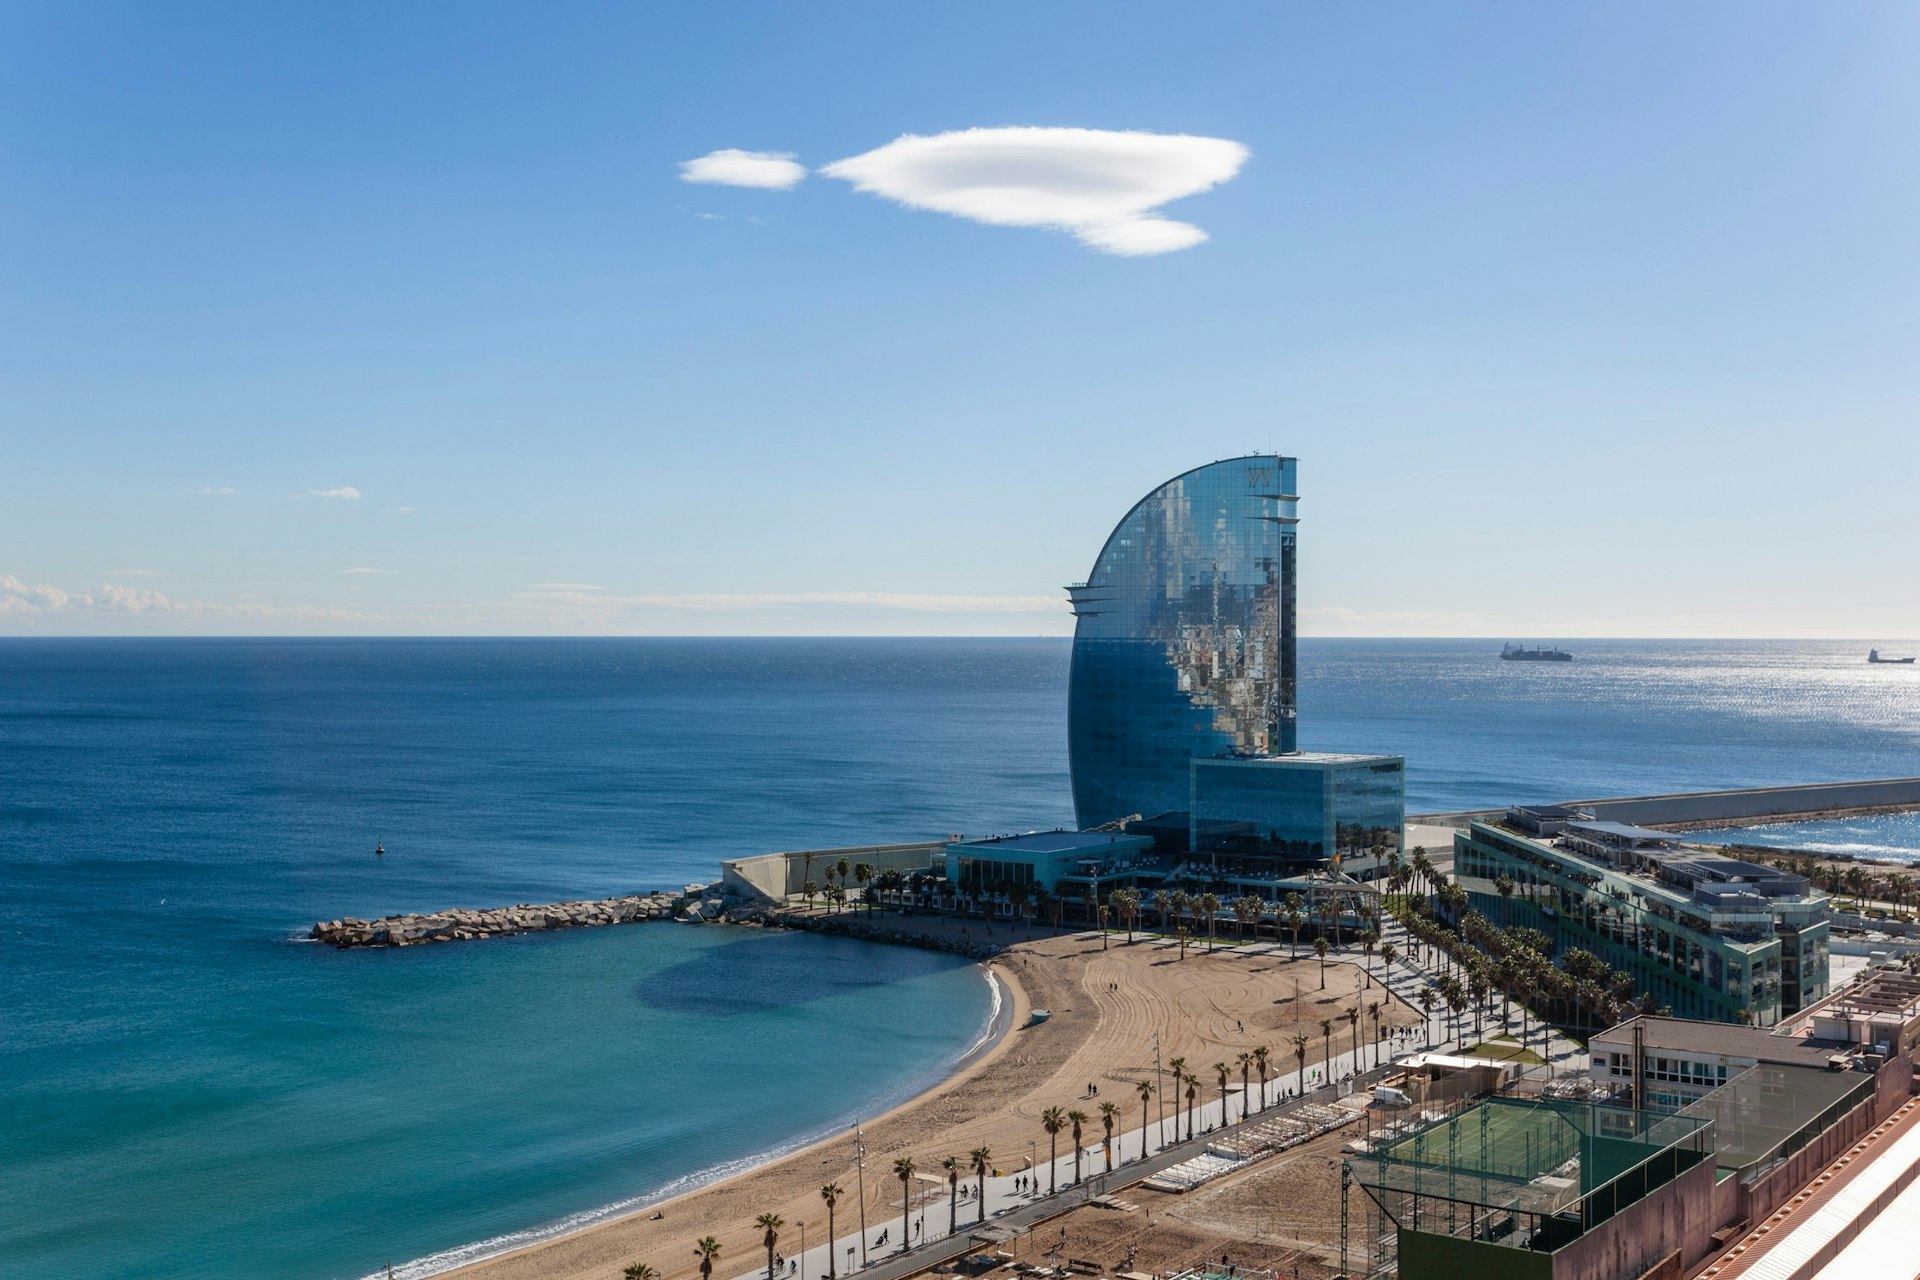 The coastline with Barcelona's beaches and a large hotel in the background